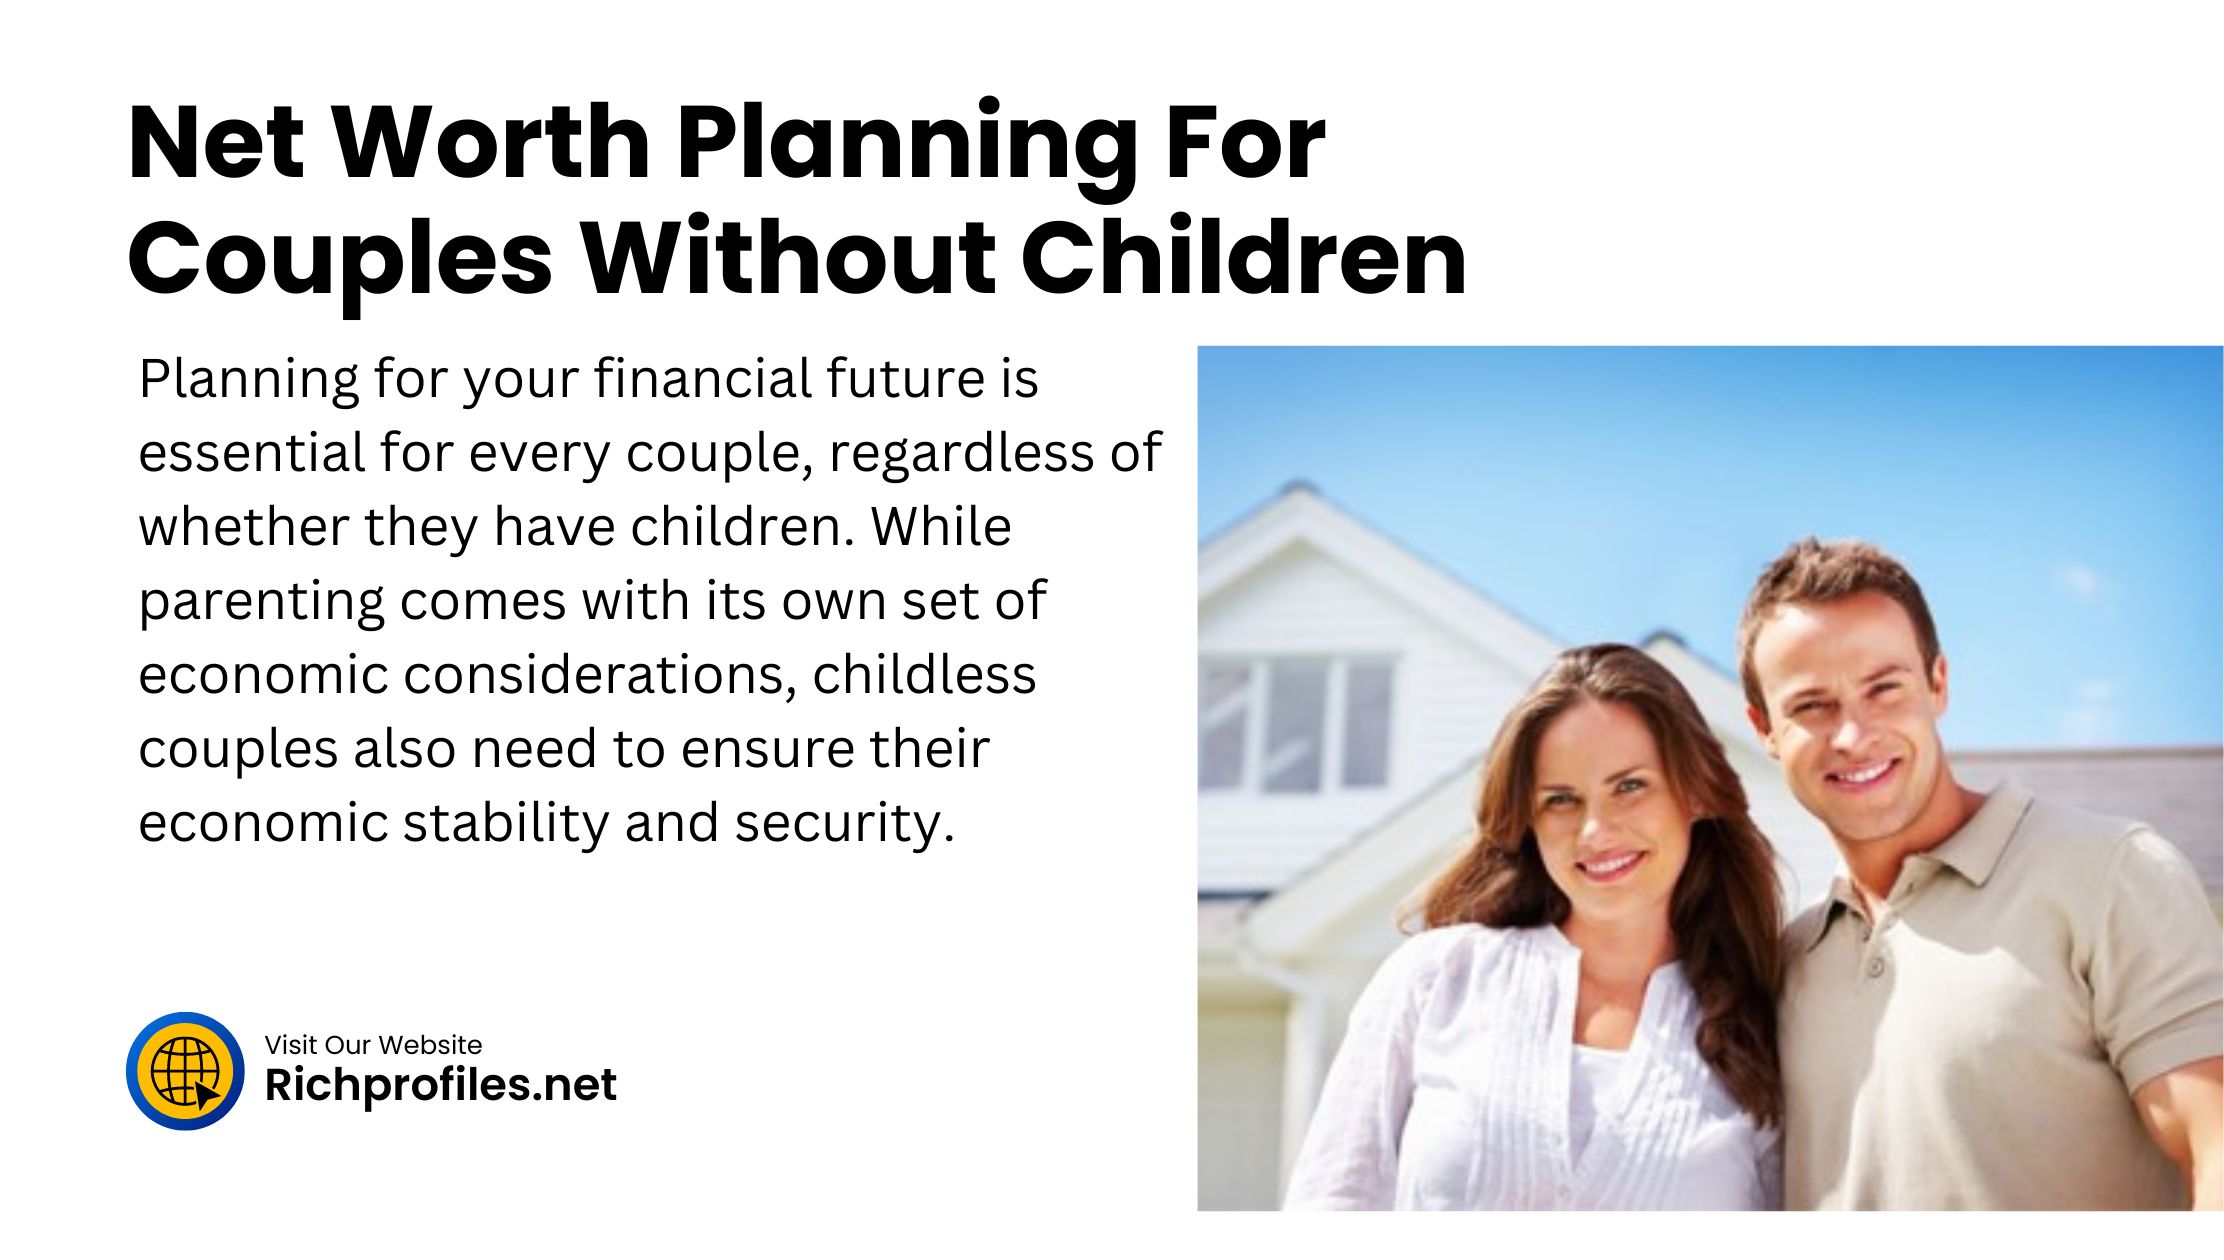 Net Worth Planning For Couples Without Children